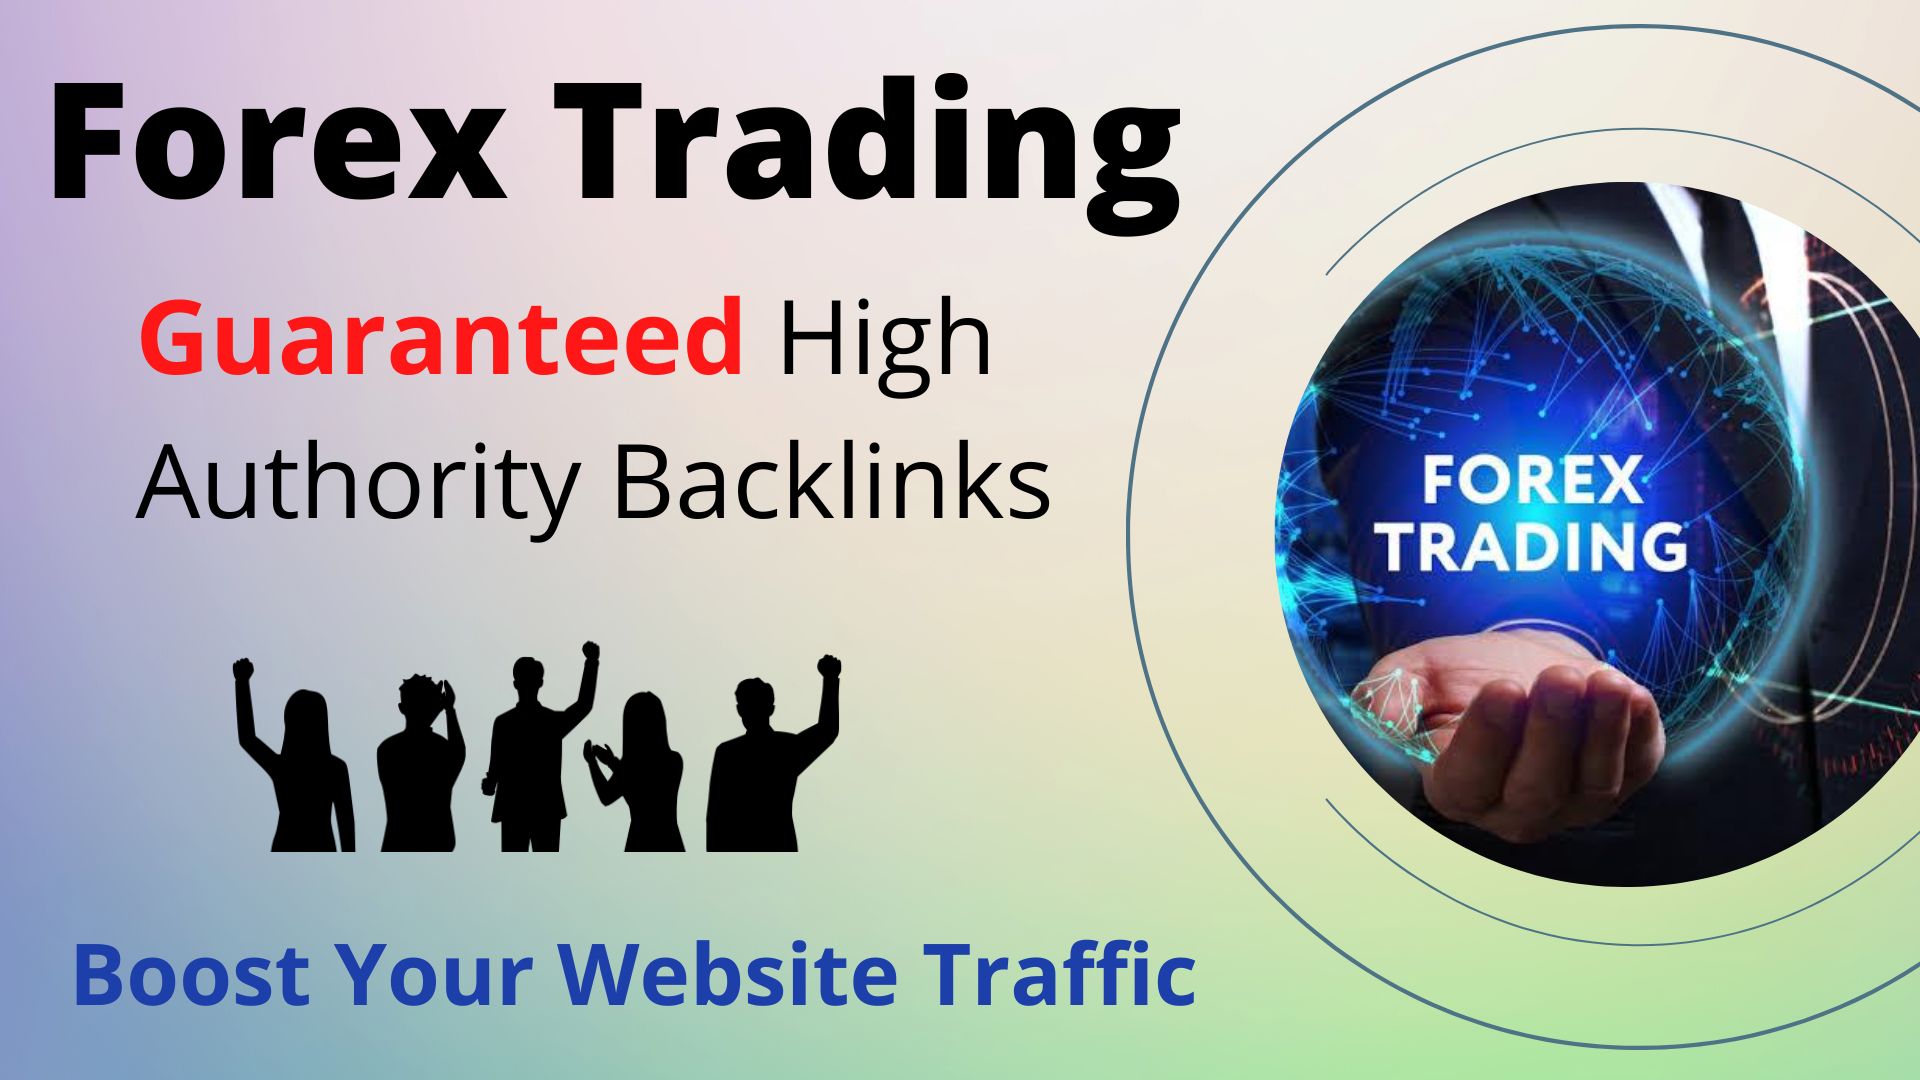 I will provide 20 Forex Trading high authority forum post backlinks